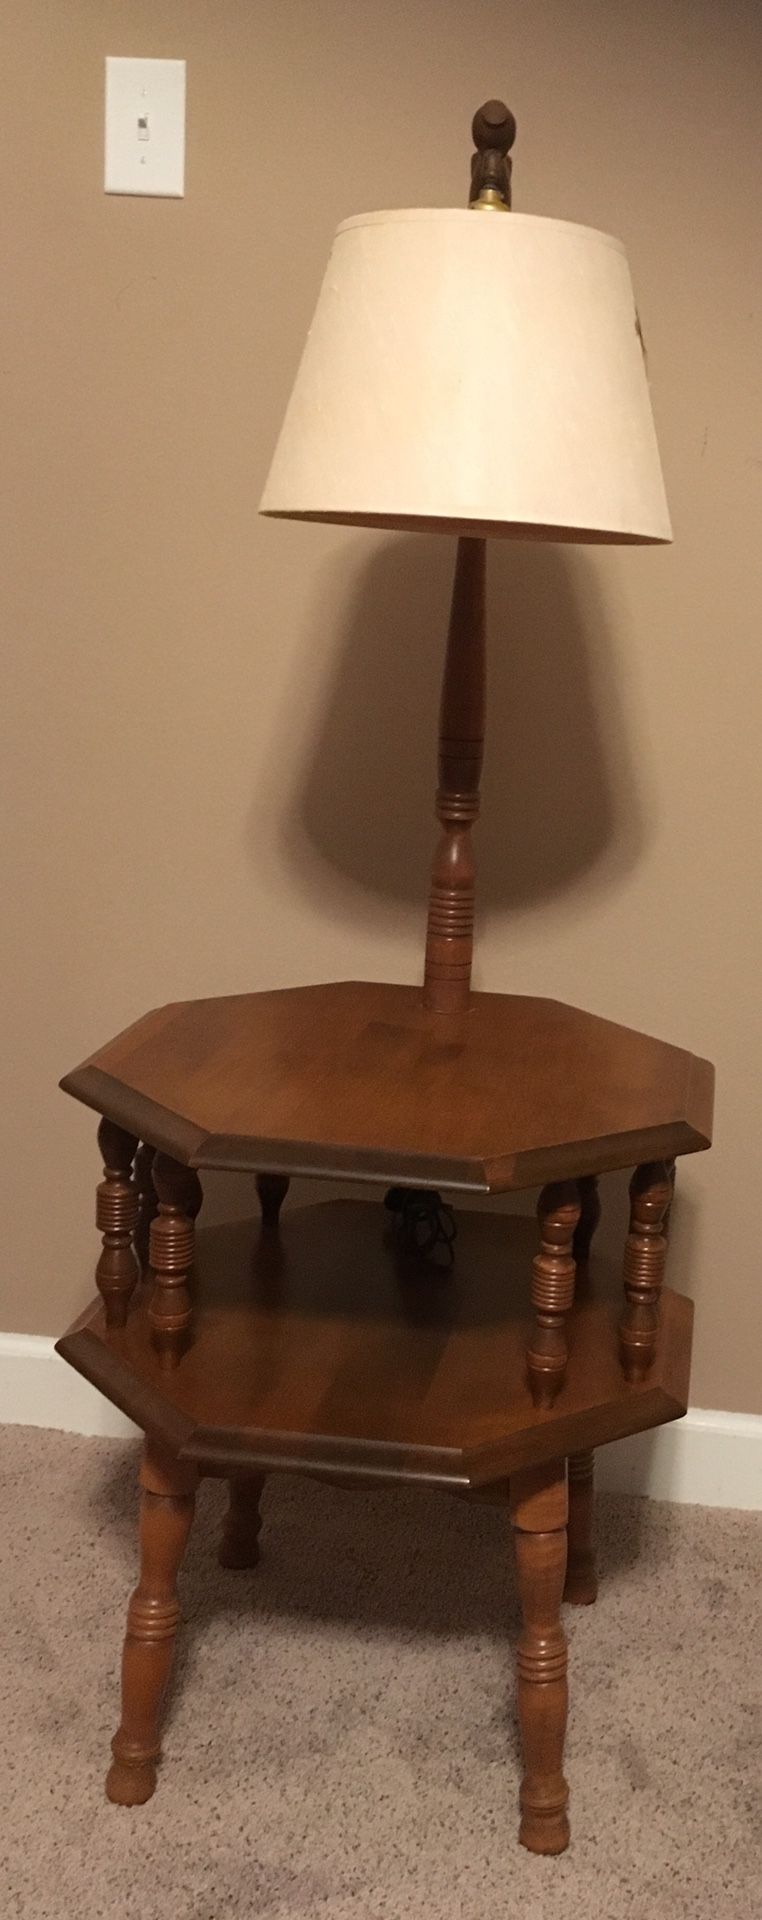 Antique Reading lamp wood table, taking best offers.